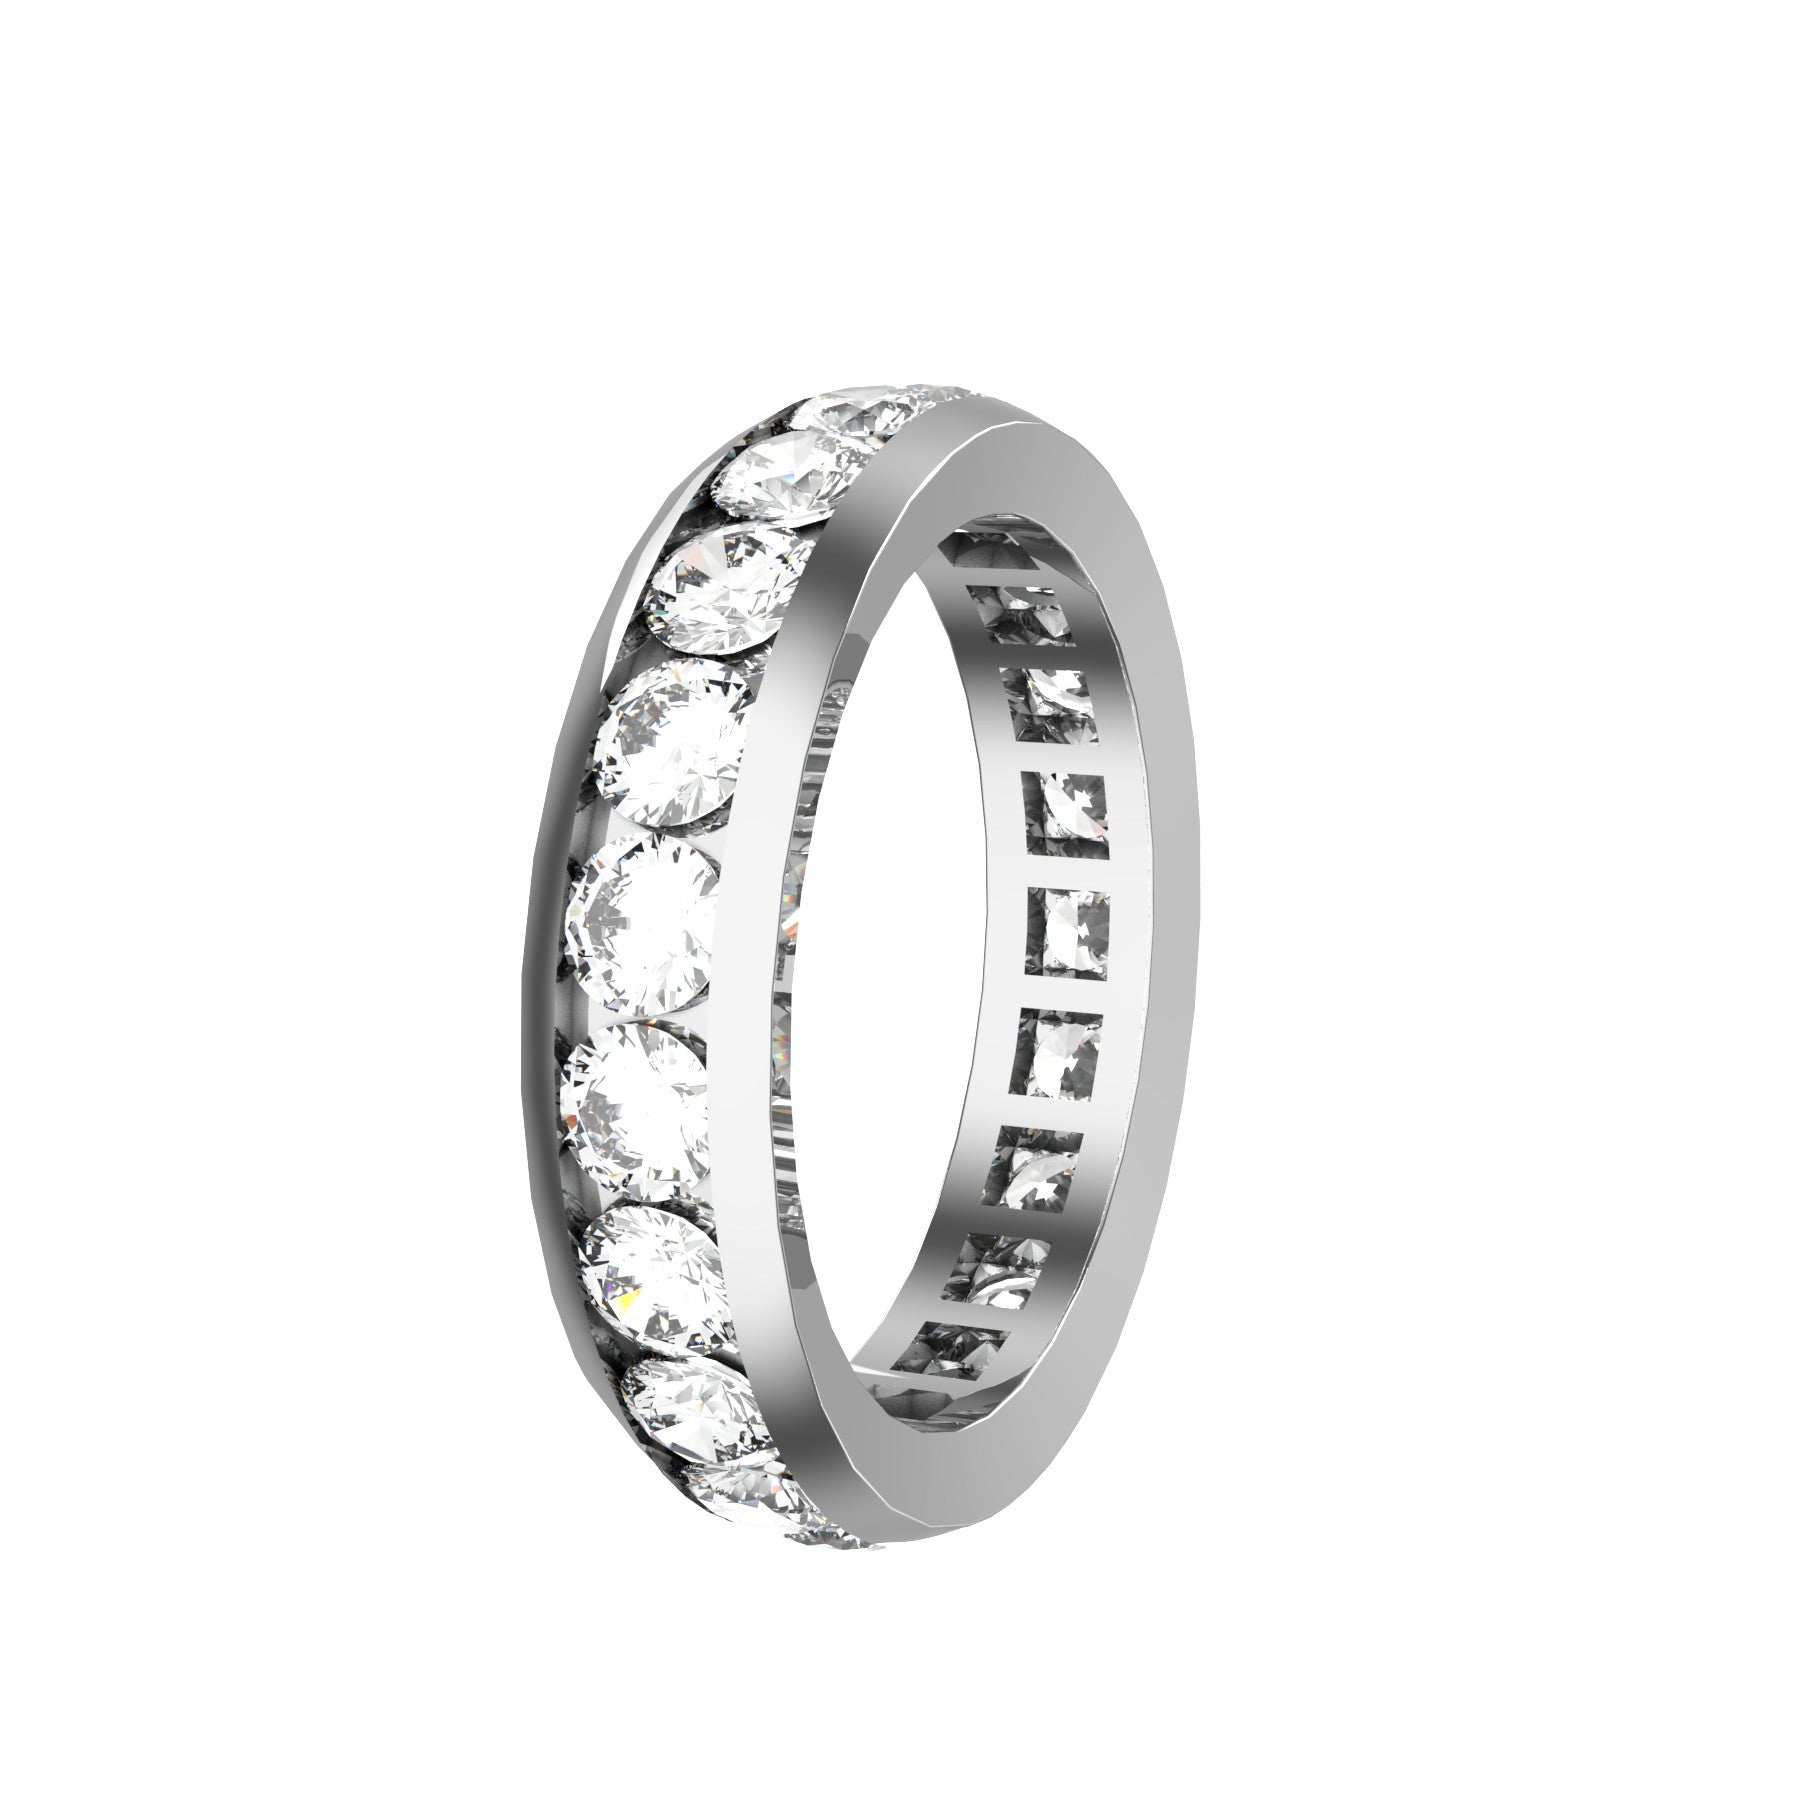 everlasting wedding band, 18 k white gold, 0,10 ct round natural diamonds, weight about 4,70 g. (0,16 oz), width 4,70 mm